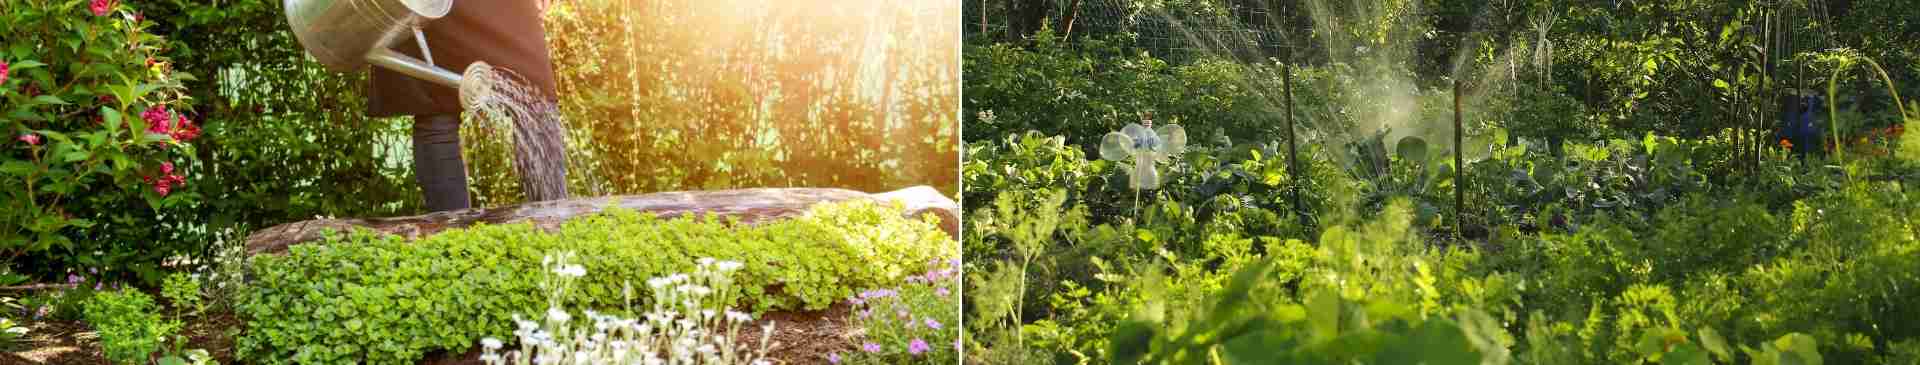 Water-Saving Techniques and Drought-Tolerant Herbs and Flowers